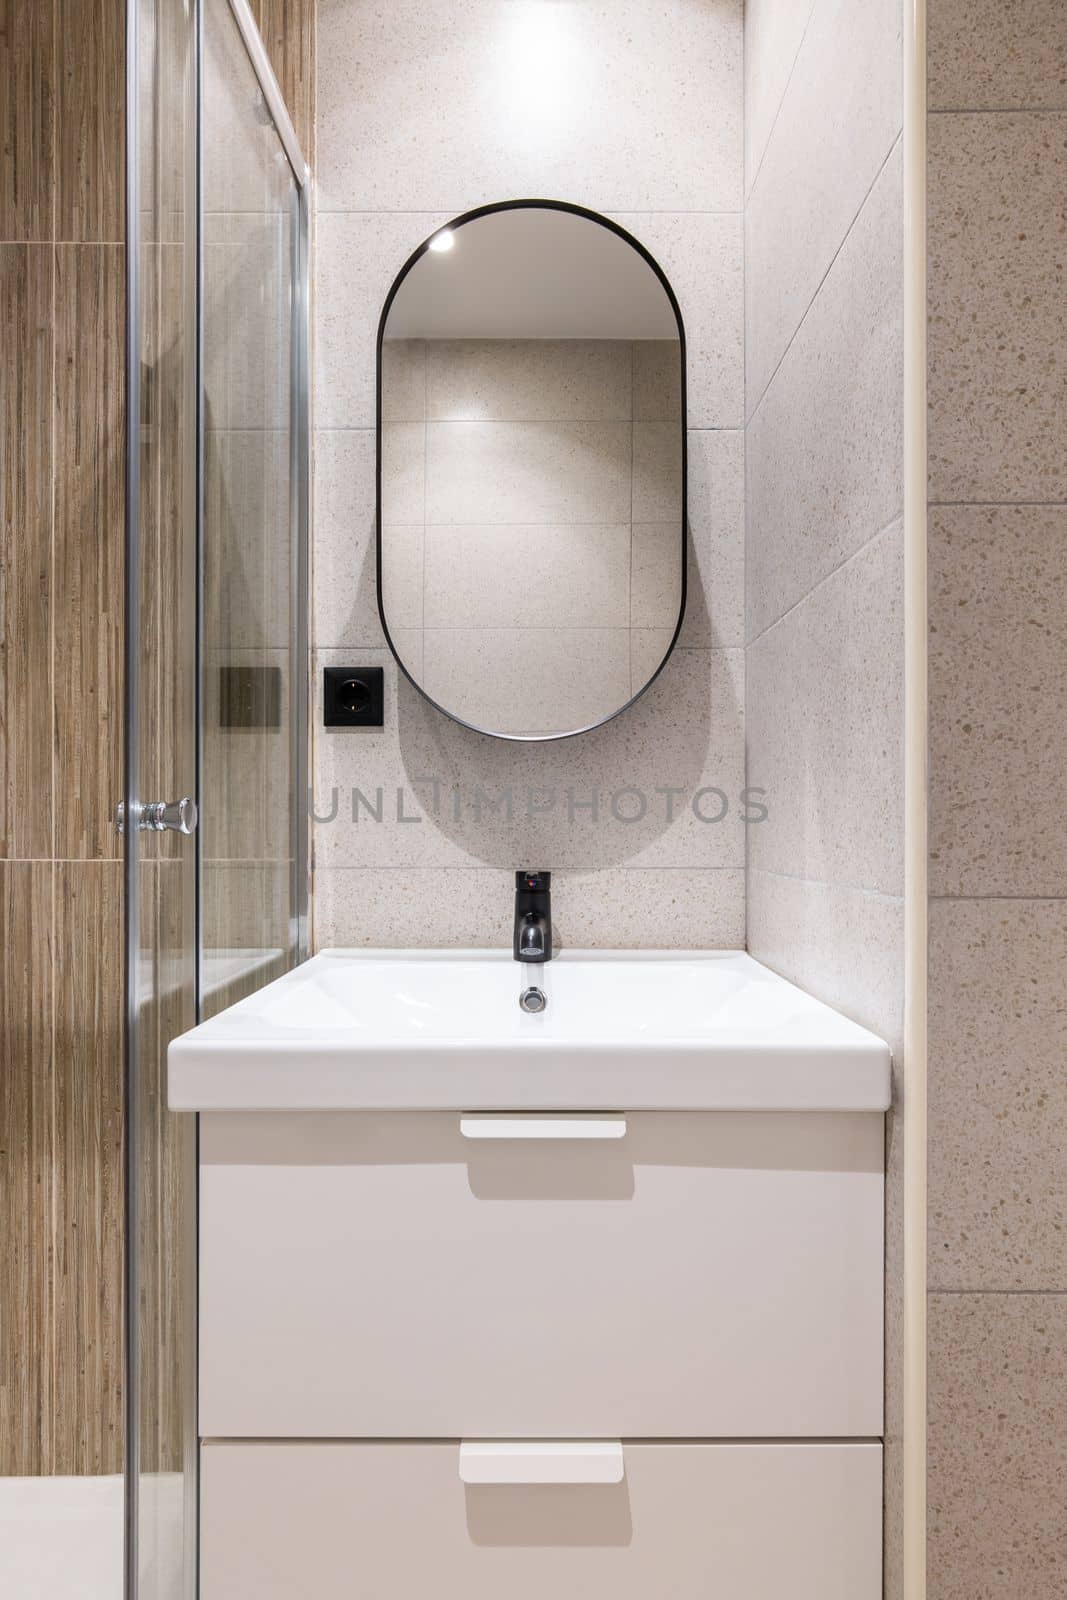 Closeup of a bathroom alcove with bright artificial lighting, with a white solid ceramic sink on a two-drawer vanity. Large modern oval mirror on the wall above the sink. by apavlin